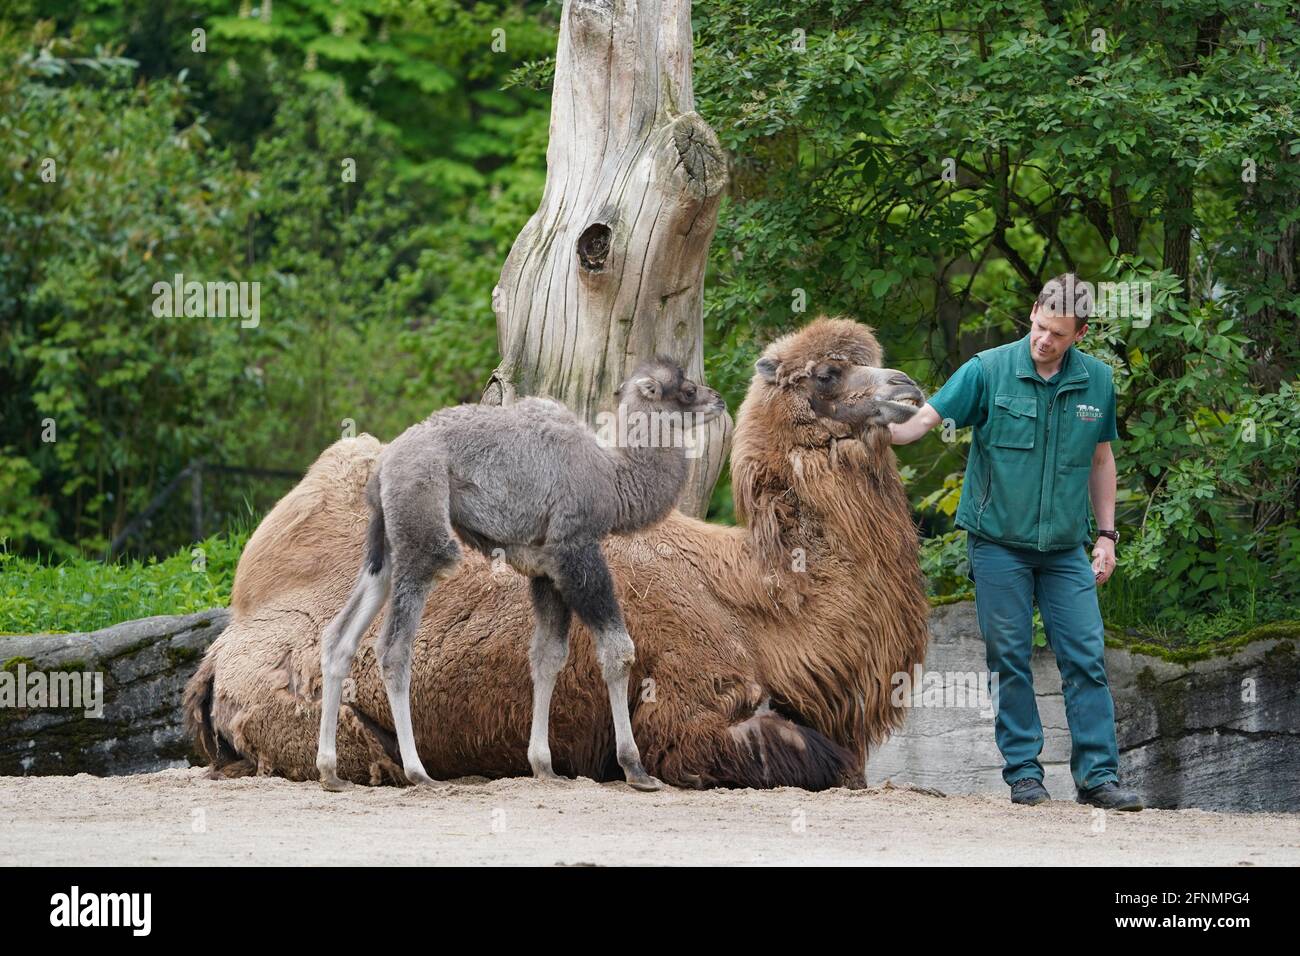 Hamburg, Germany. 18th May, 2021. District animal keeper Benjamin Krüger stands next to baby camel Silke and her mother Samira at Hagenbeck Zoo. The offspring of the Asian camel Samira was born on 2 May. (to dpa 'Cute camel offspring at Hamburg's Hagenbeck Zoo') Credit: Marcus Brandt/dpa/Alamy Live News Stock Photo